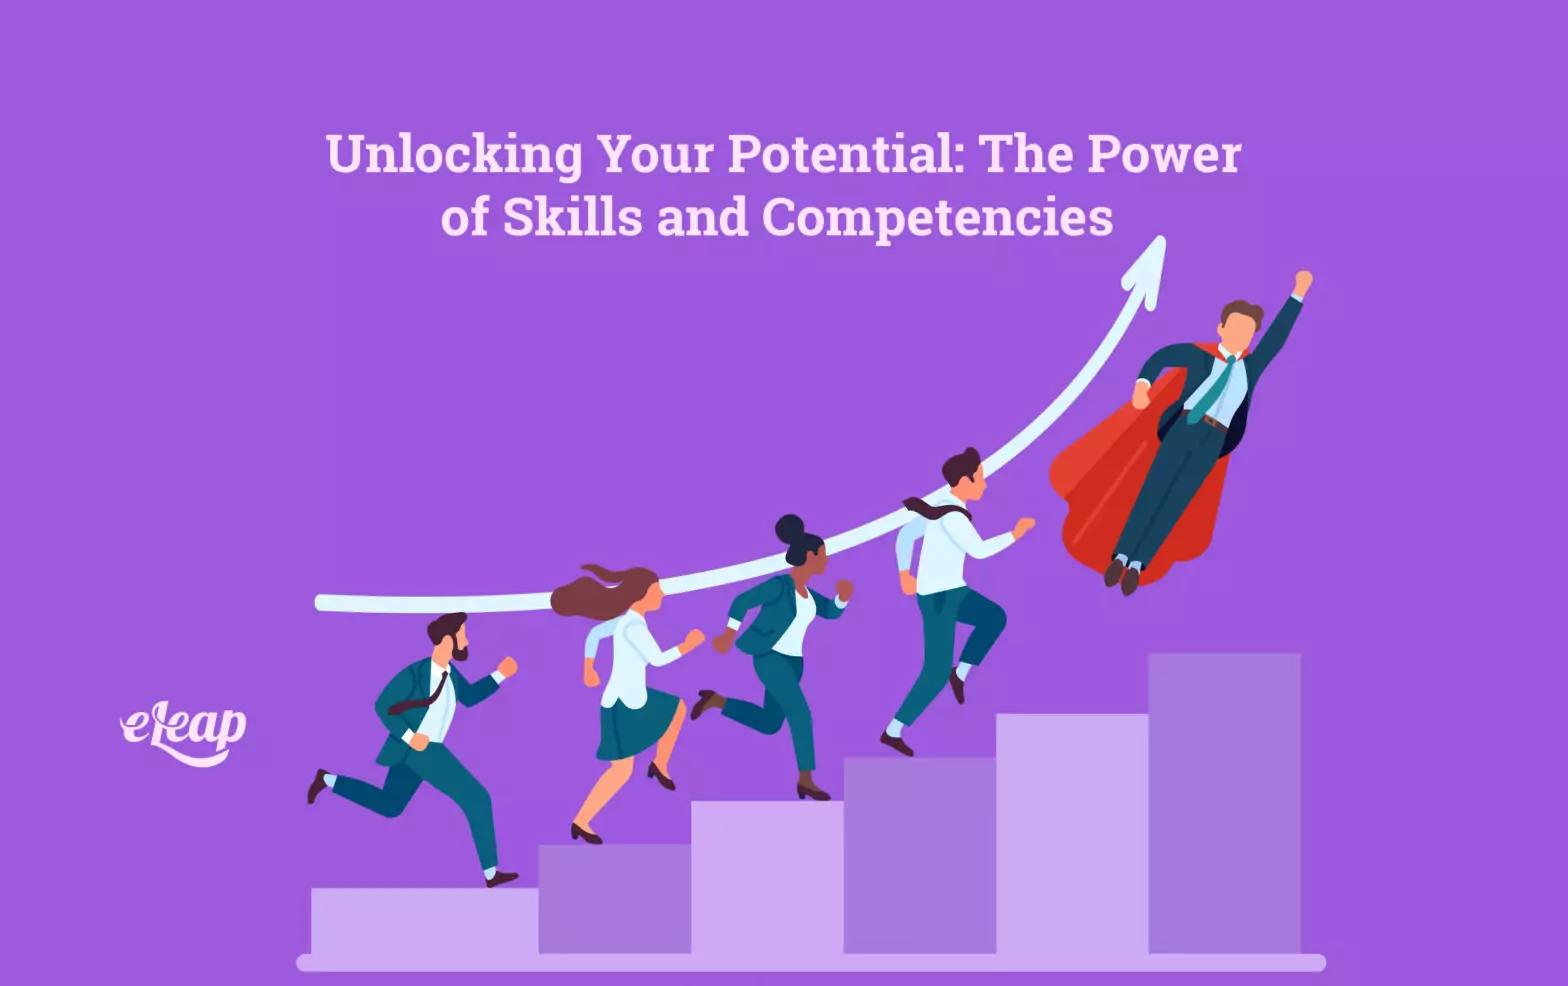 Unlocking Your Potential: The Power of Skills and Competencies